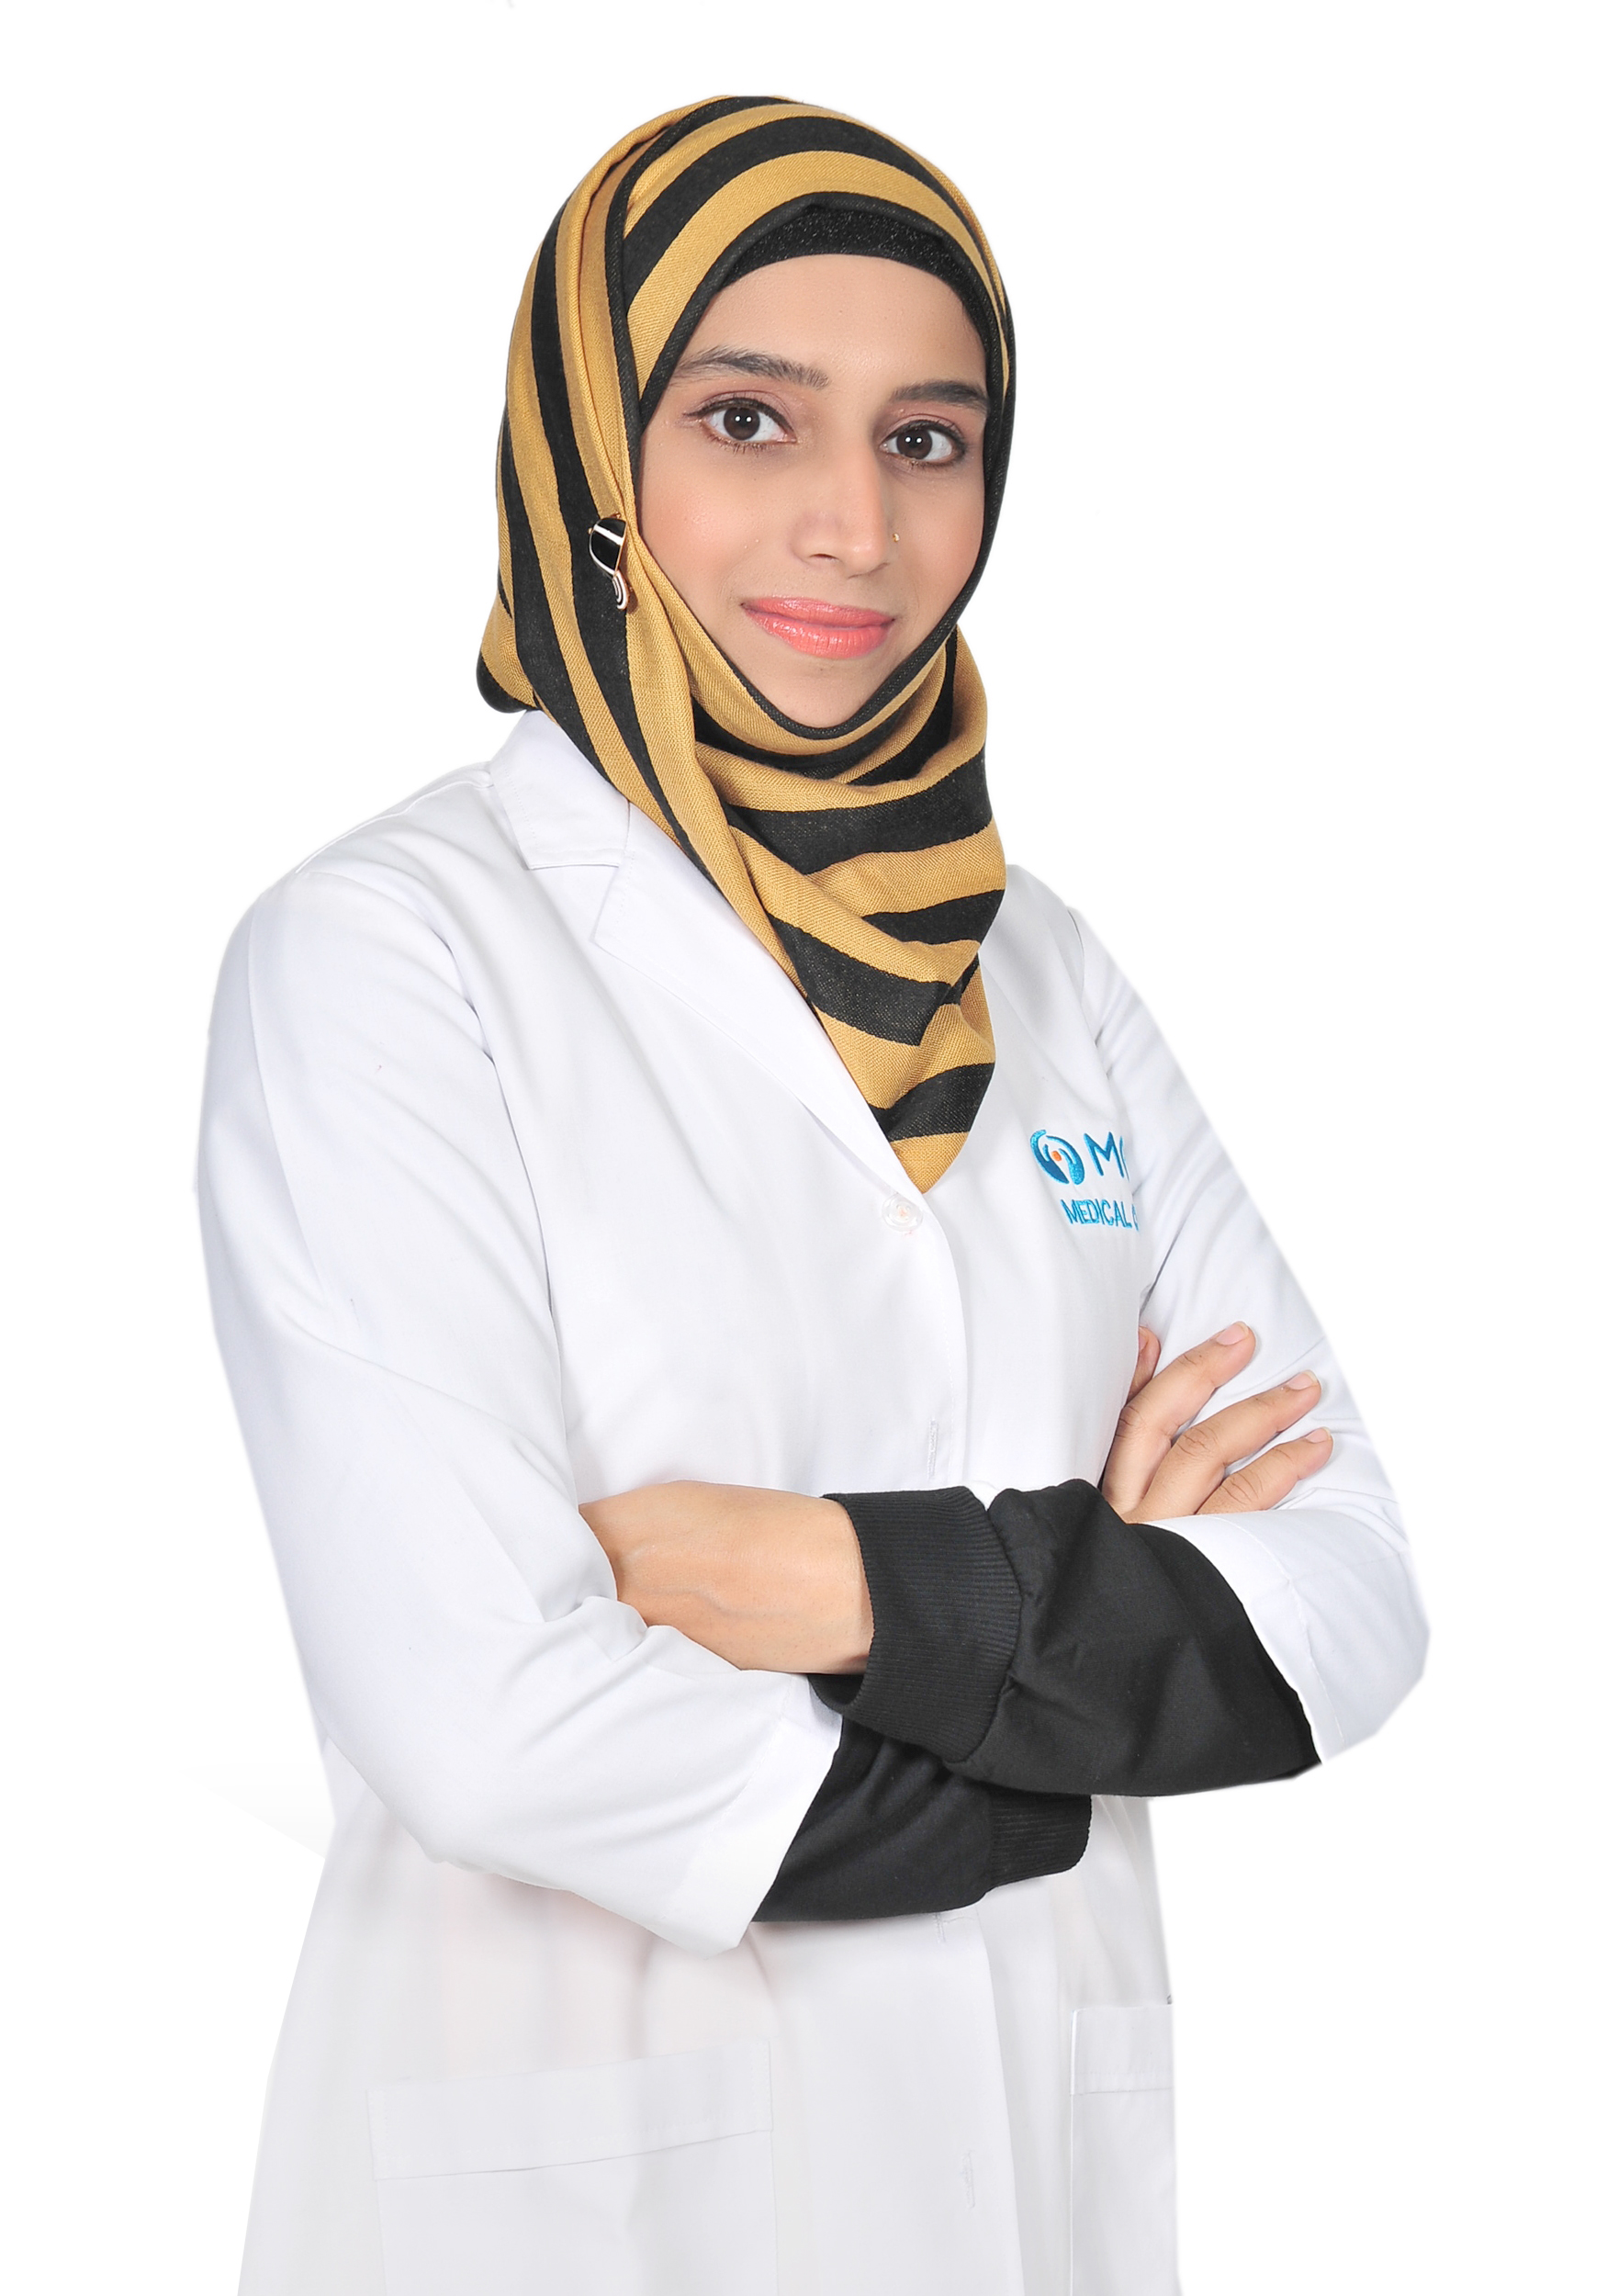 https://mgmmedical.ae/wp-content/uploads/2019/10/Dr-Syeda-Maria-profile-pic.jpg